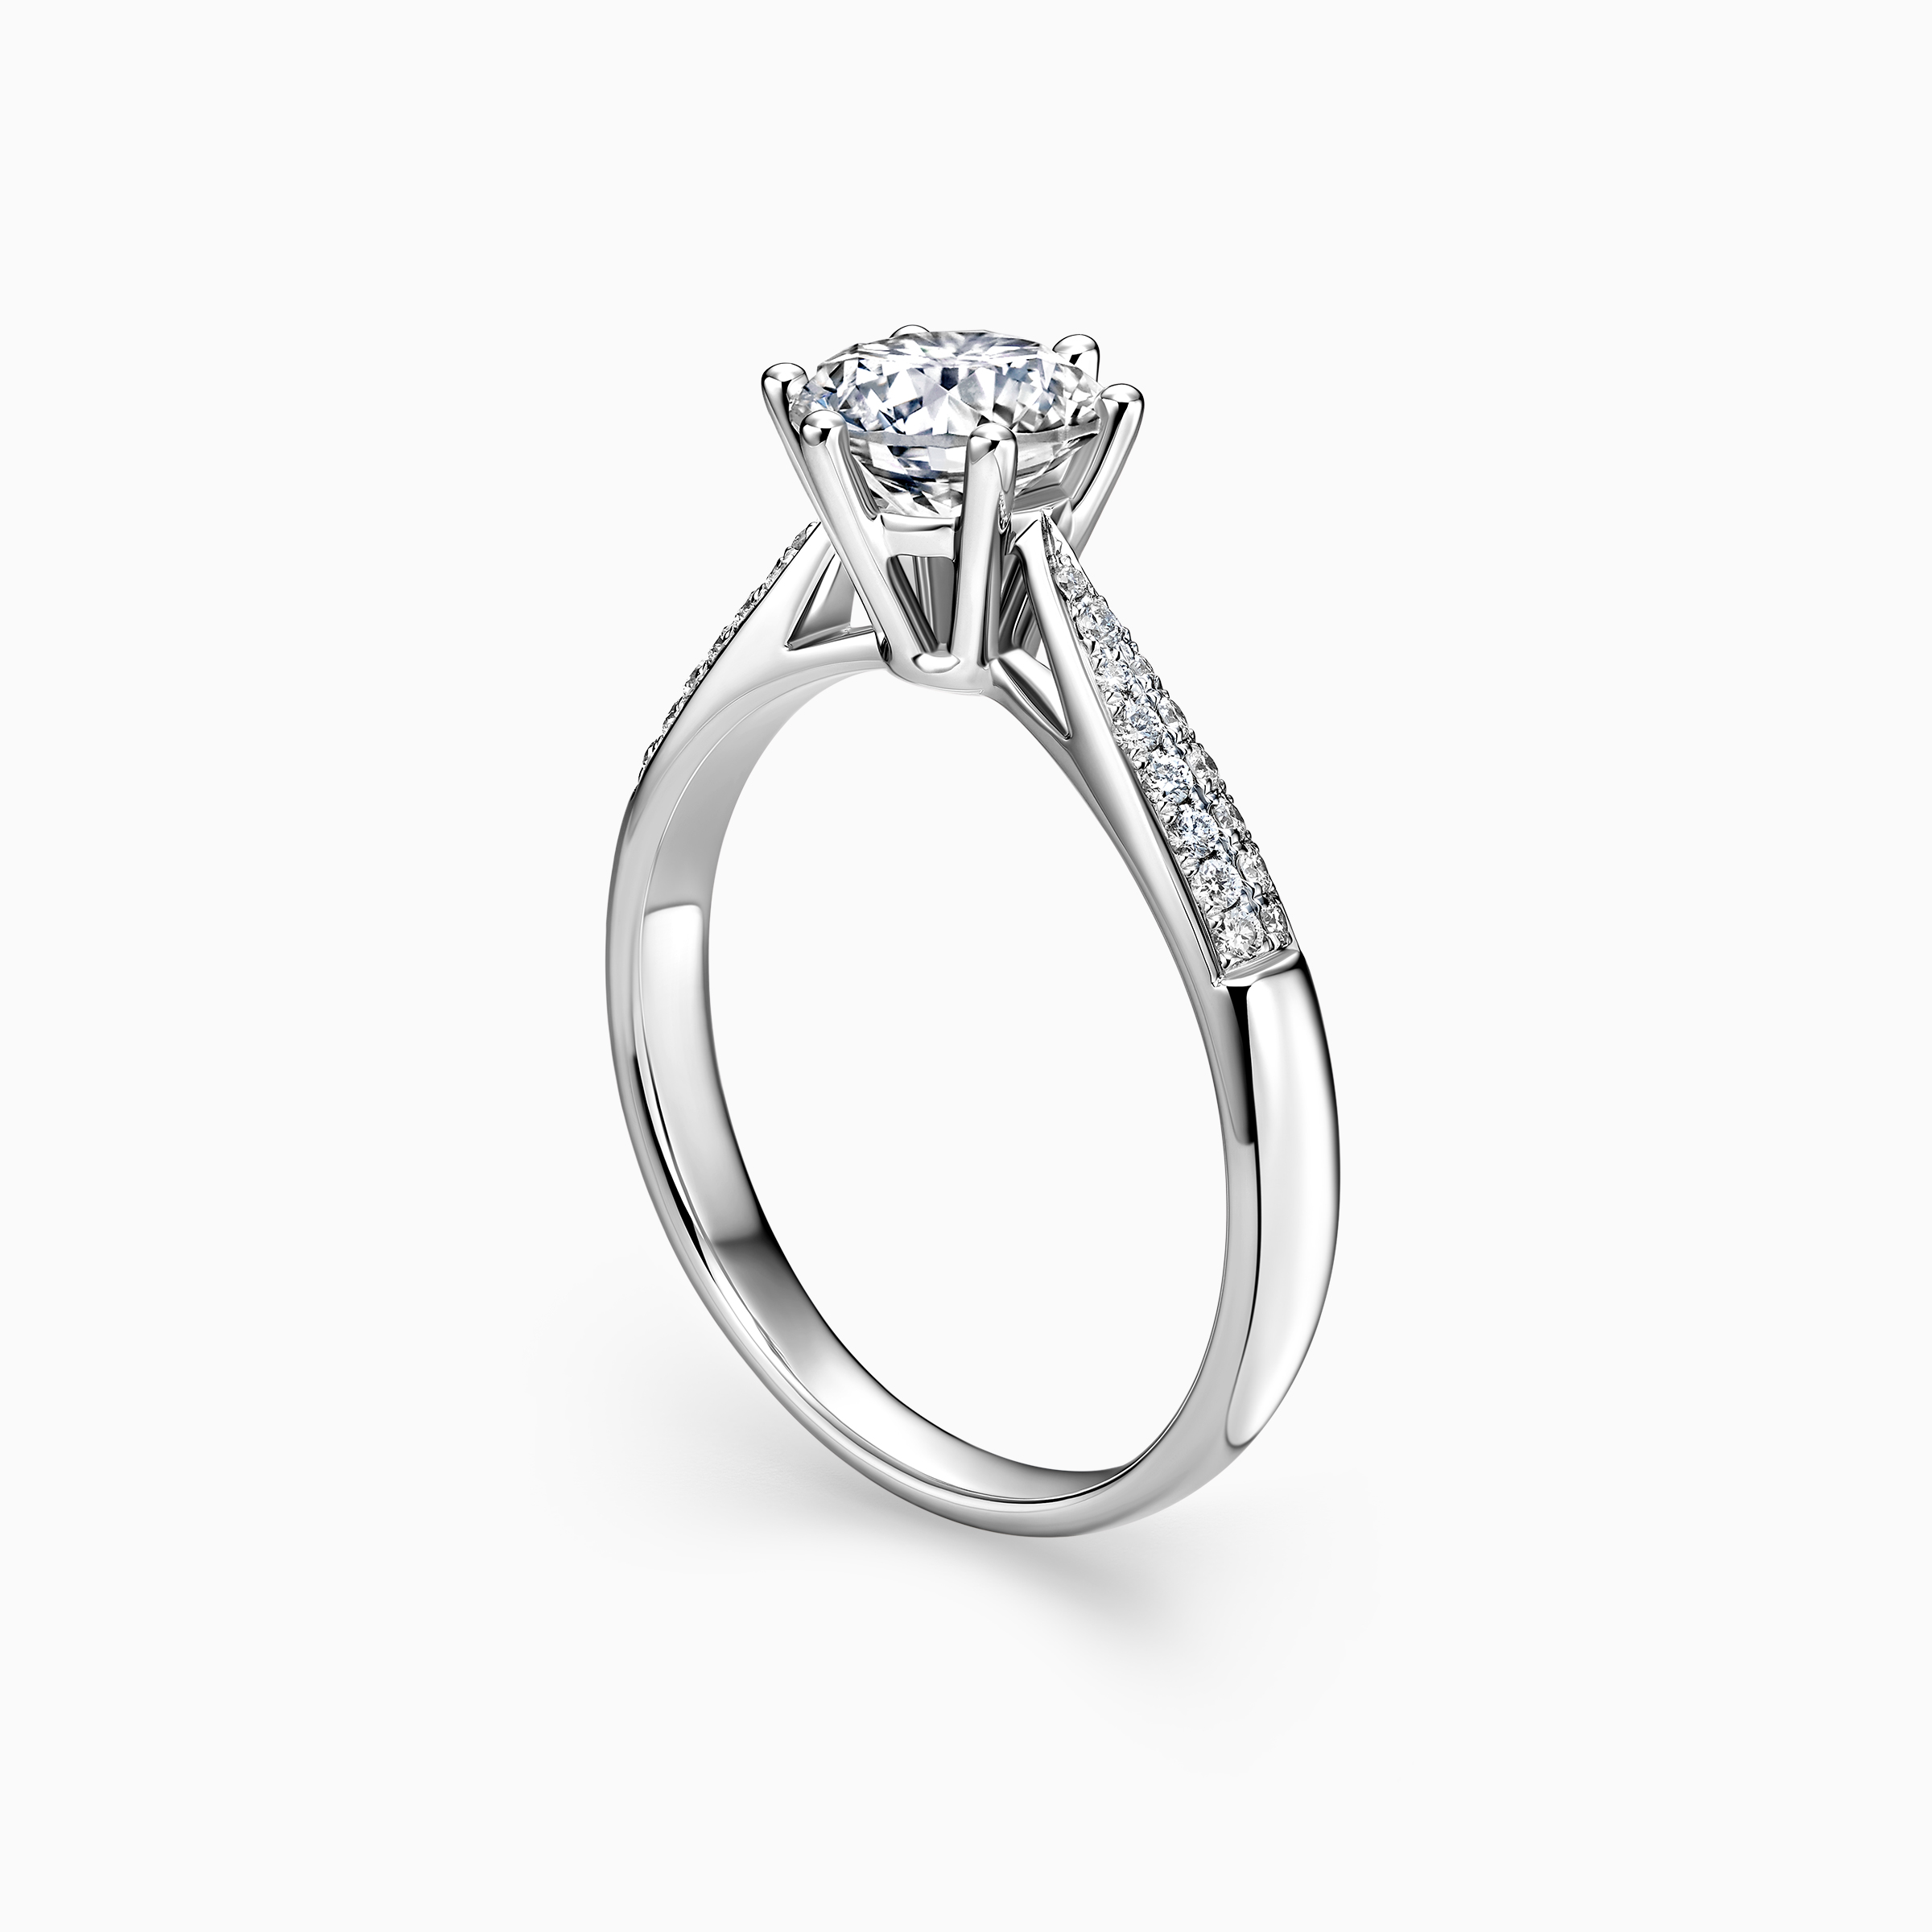 Darry Ring diamond band engagement ring side view